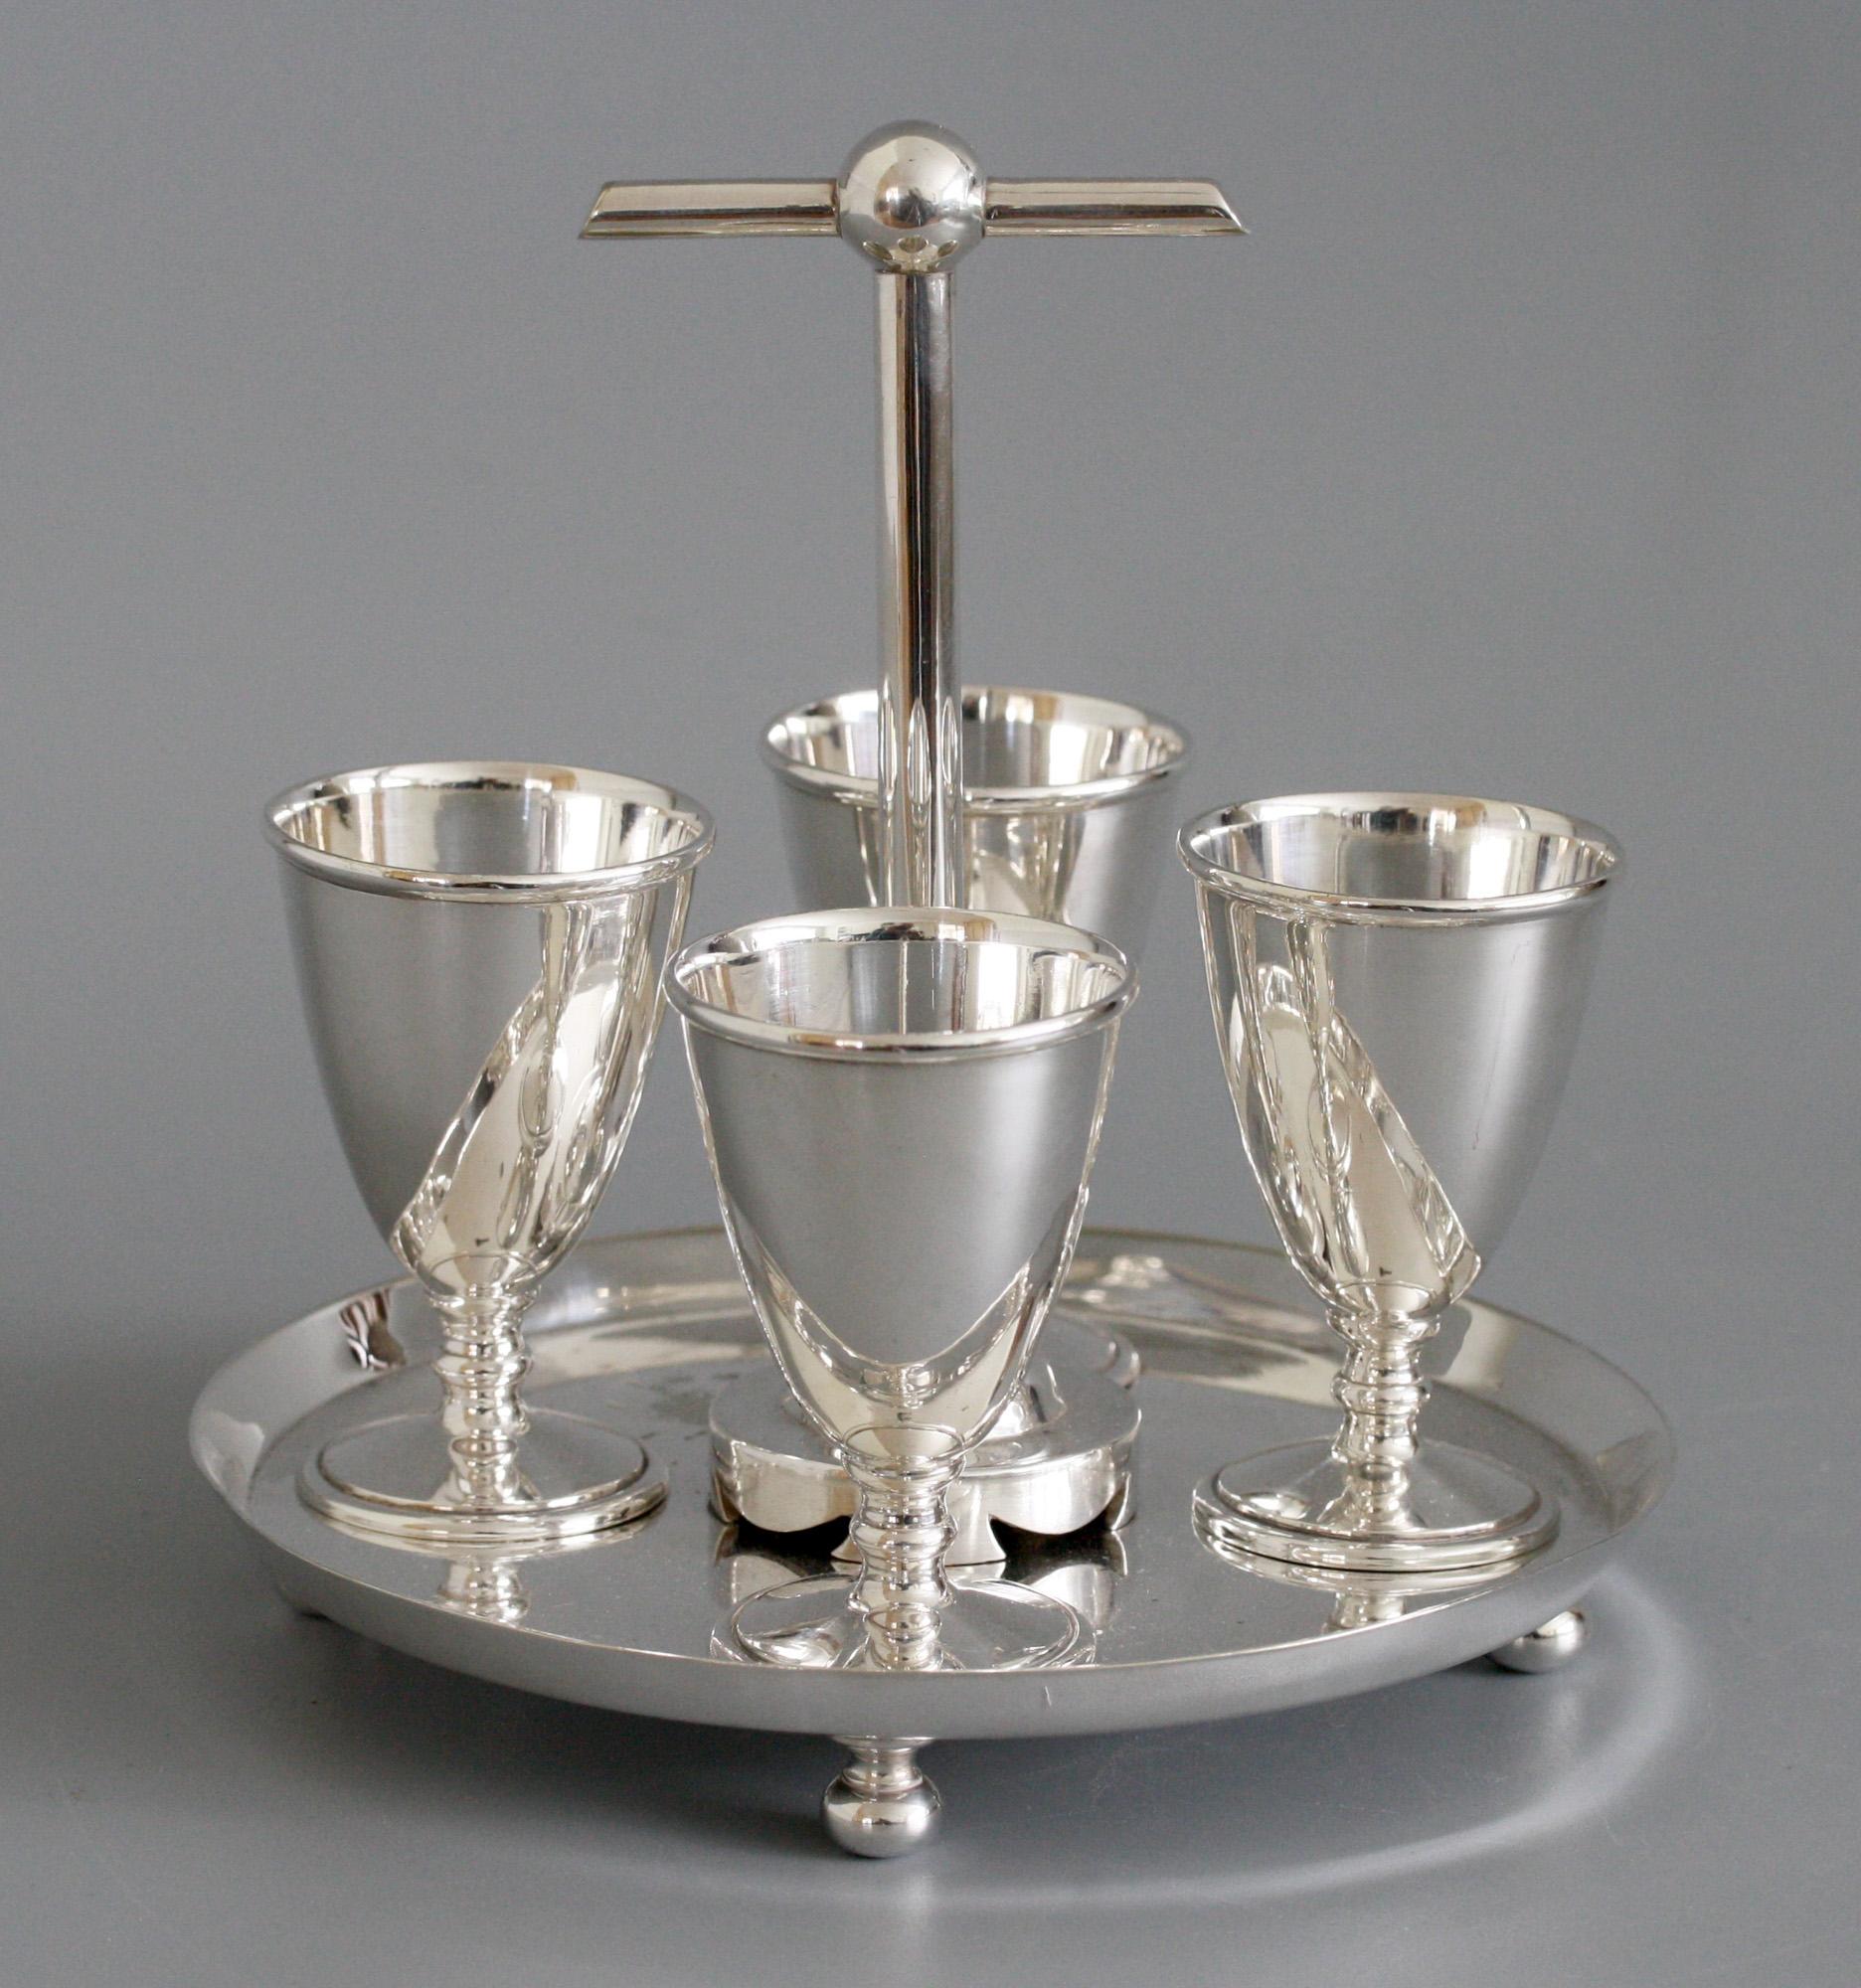 Hukin & Heath Silver Plated Four Eggcup Stand Designed by Christopher Dresser 10